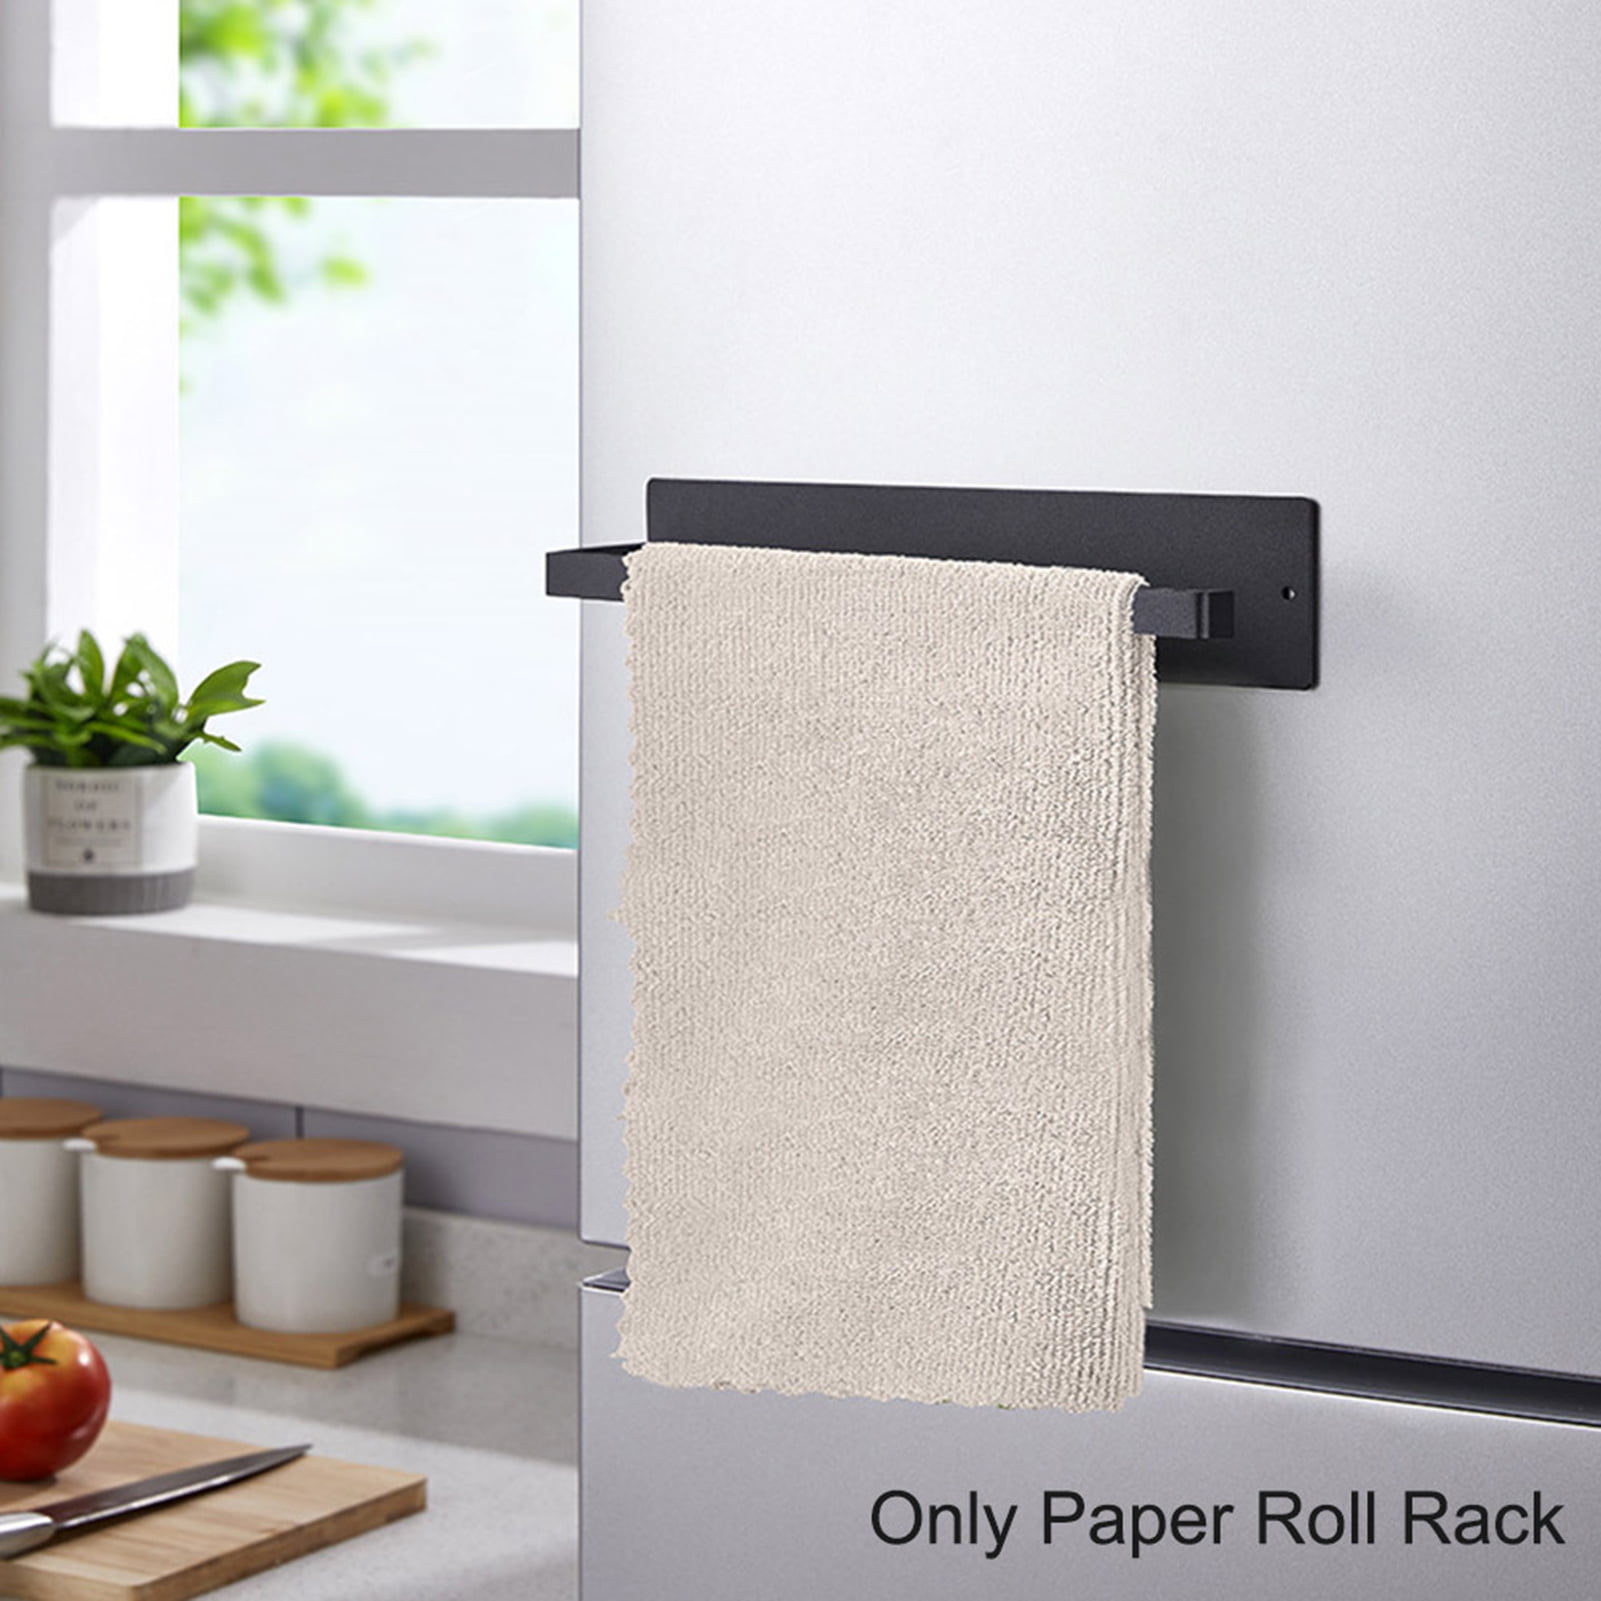 Double wall mounted rolls holder for regular toilet paper - SUPRATECH